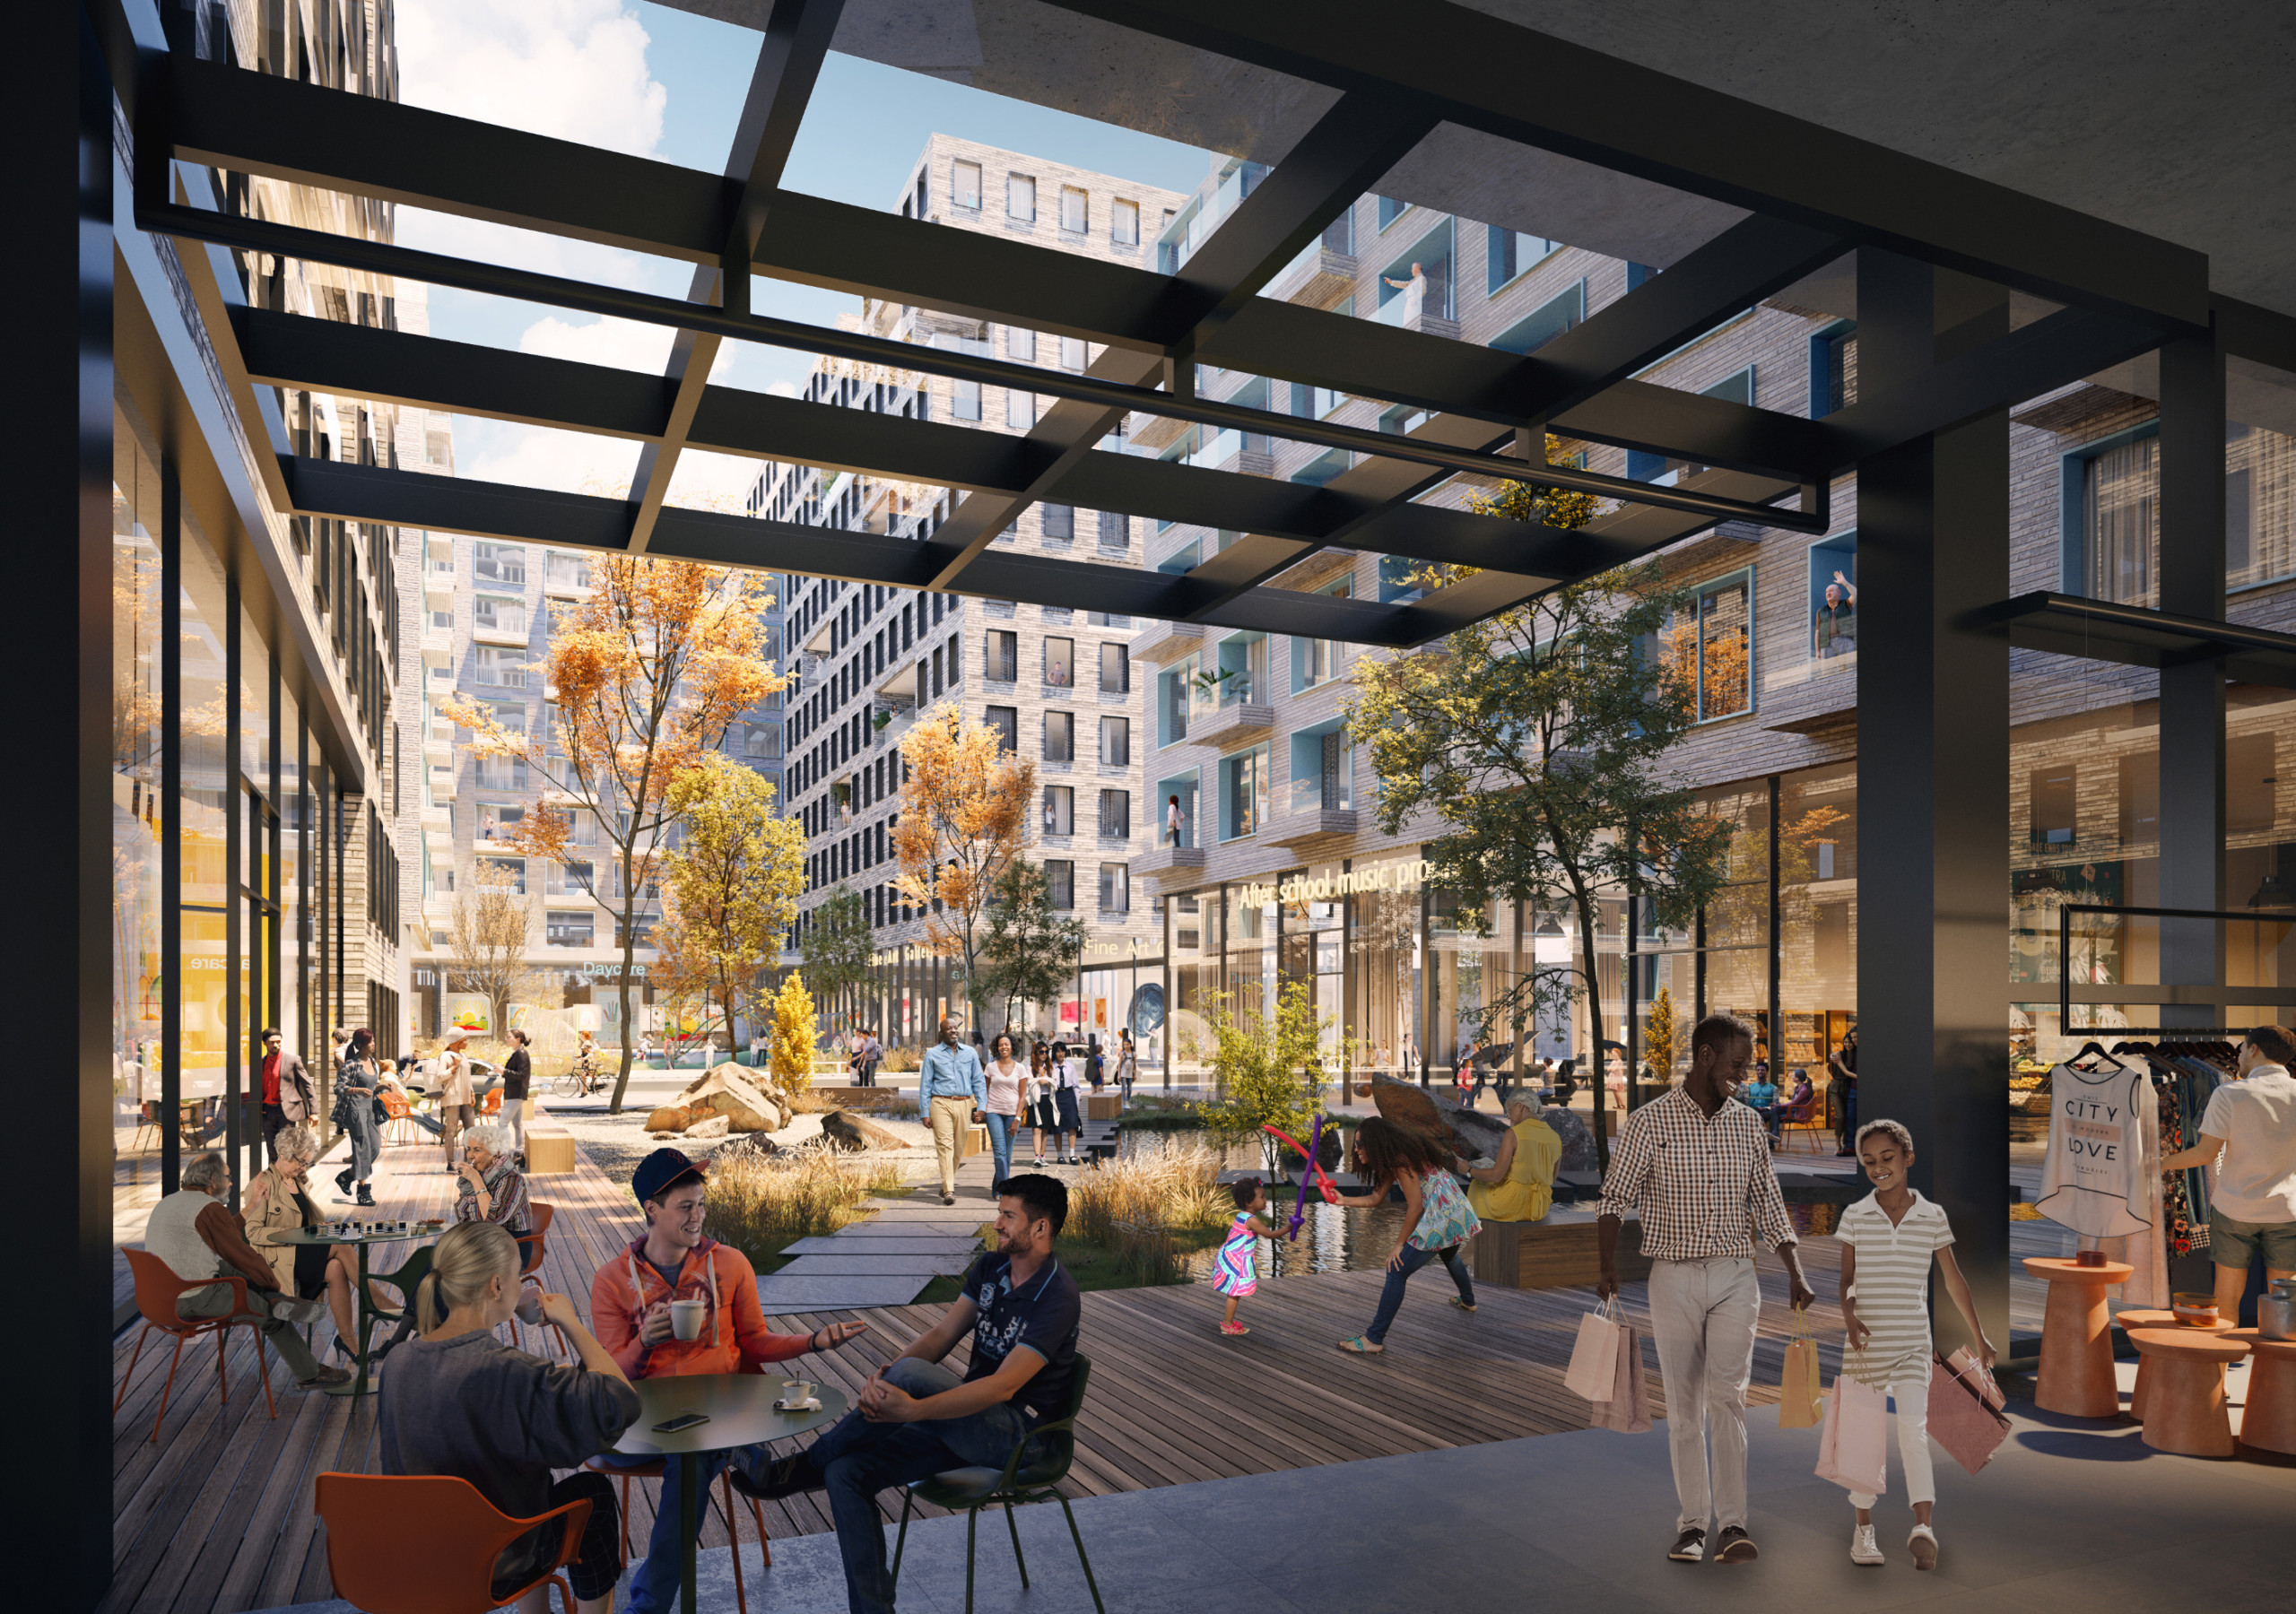 Rendering of a plaza with outdoor retail